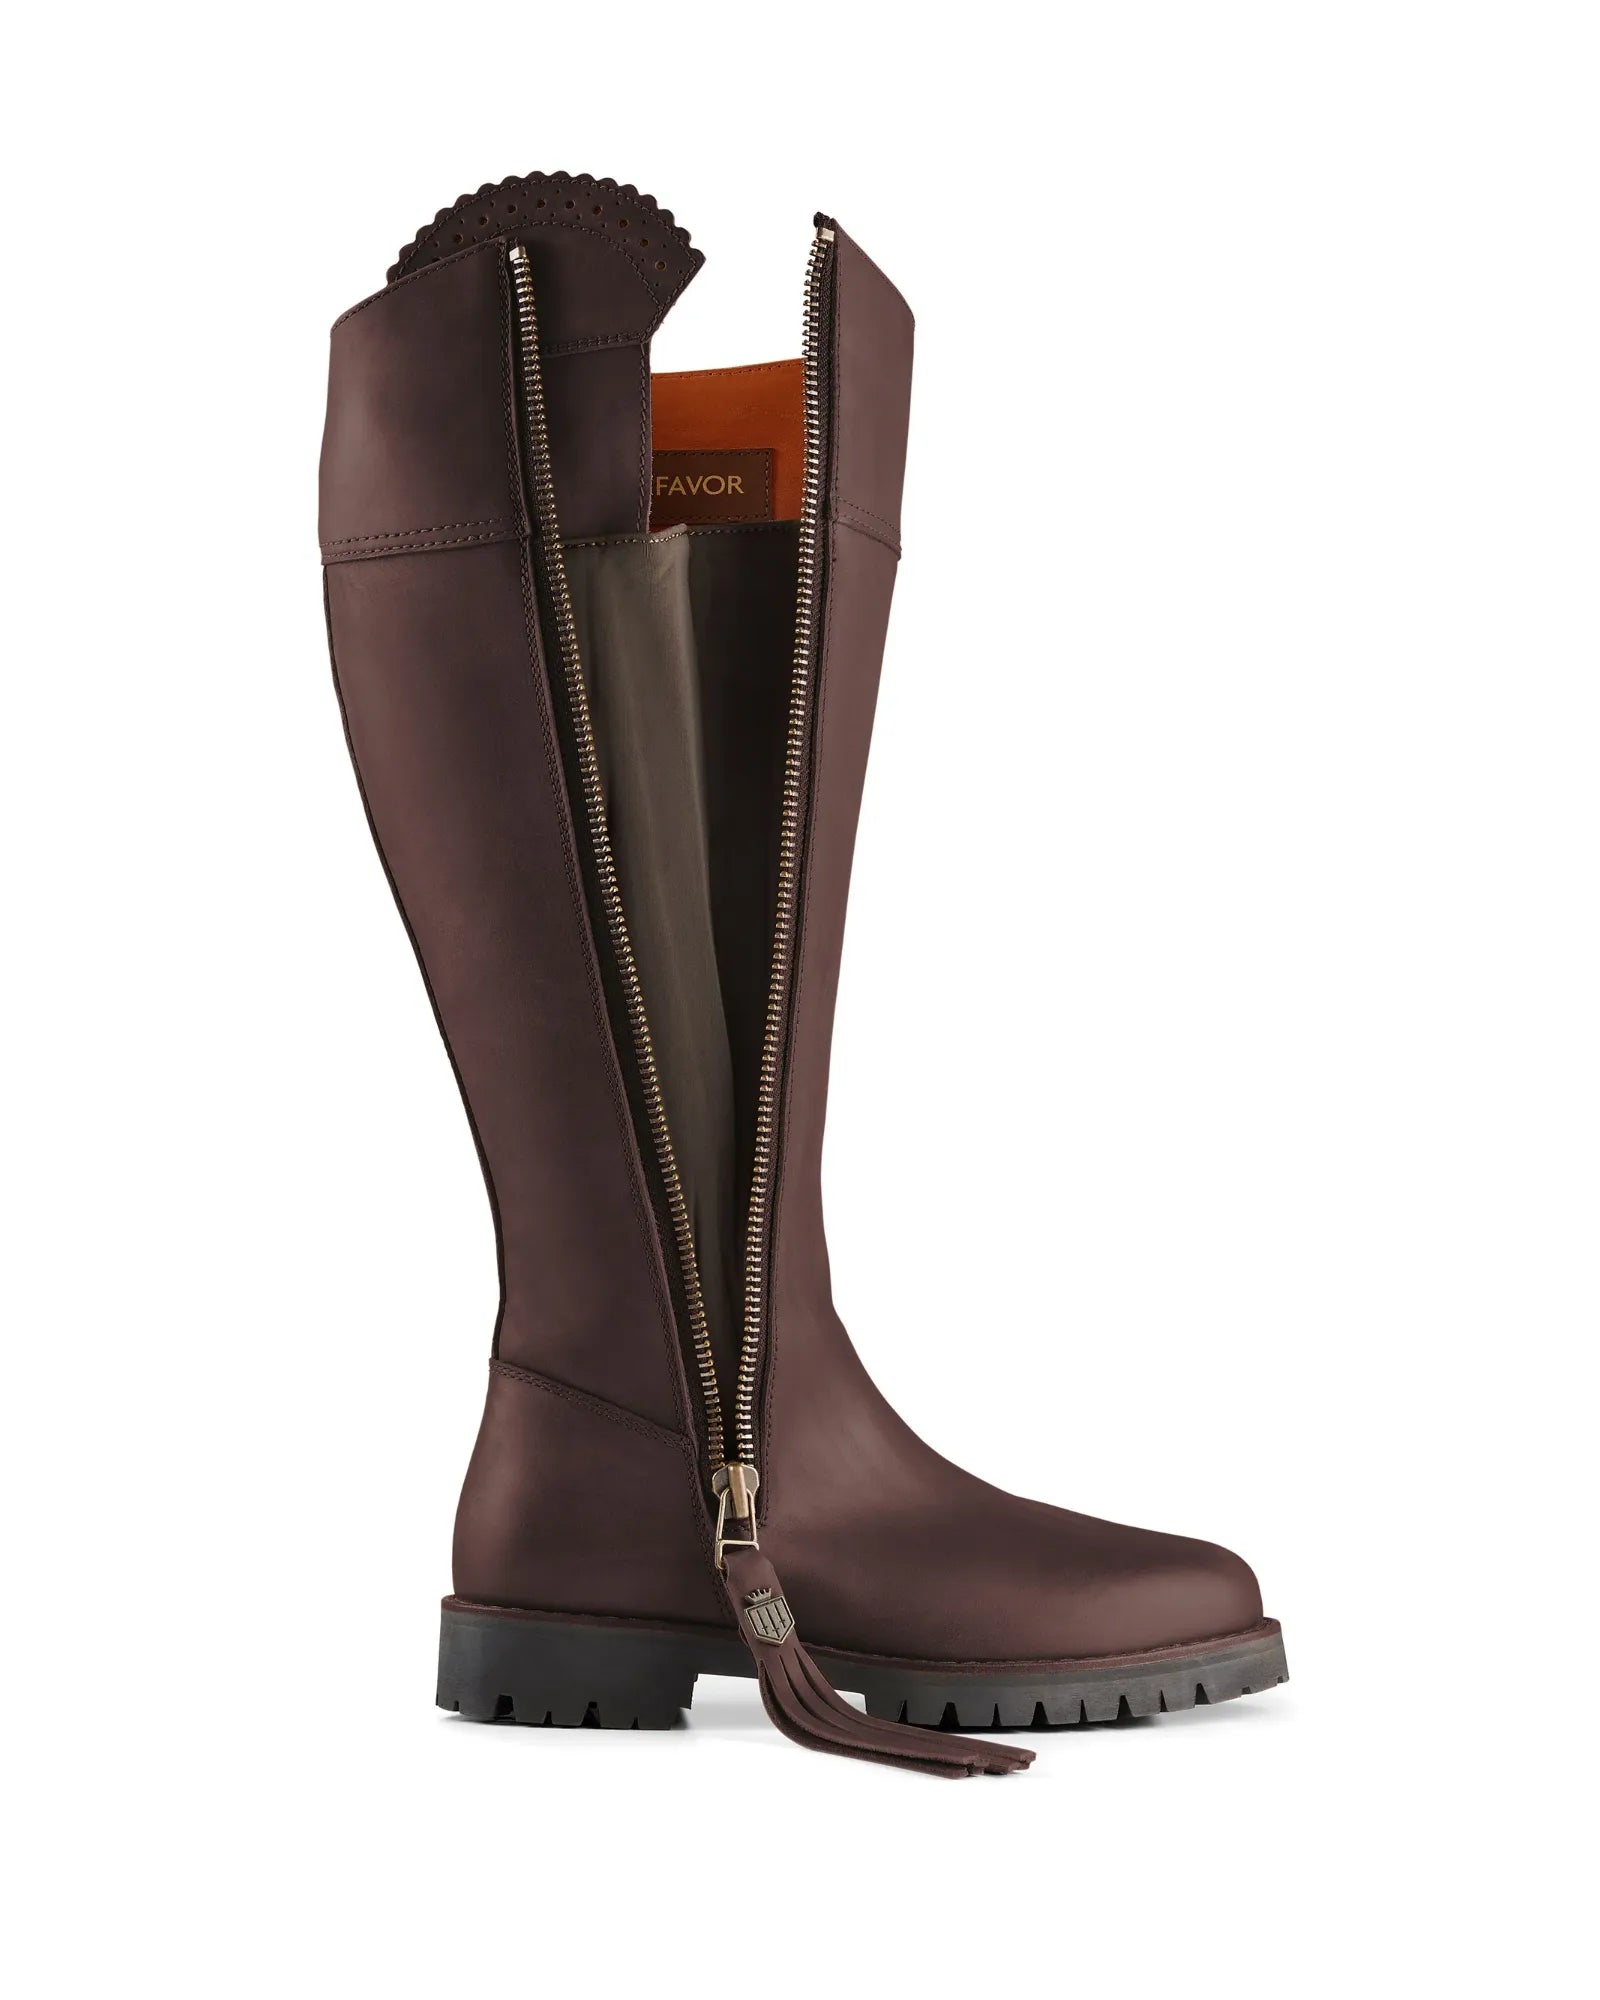 The Explorer Sporting Fit Boot - Mahogany Leather